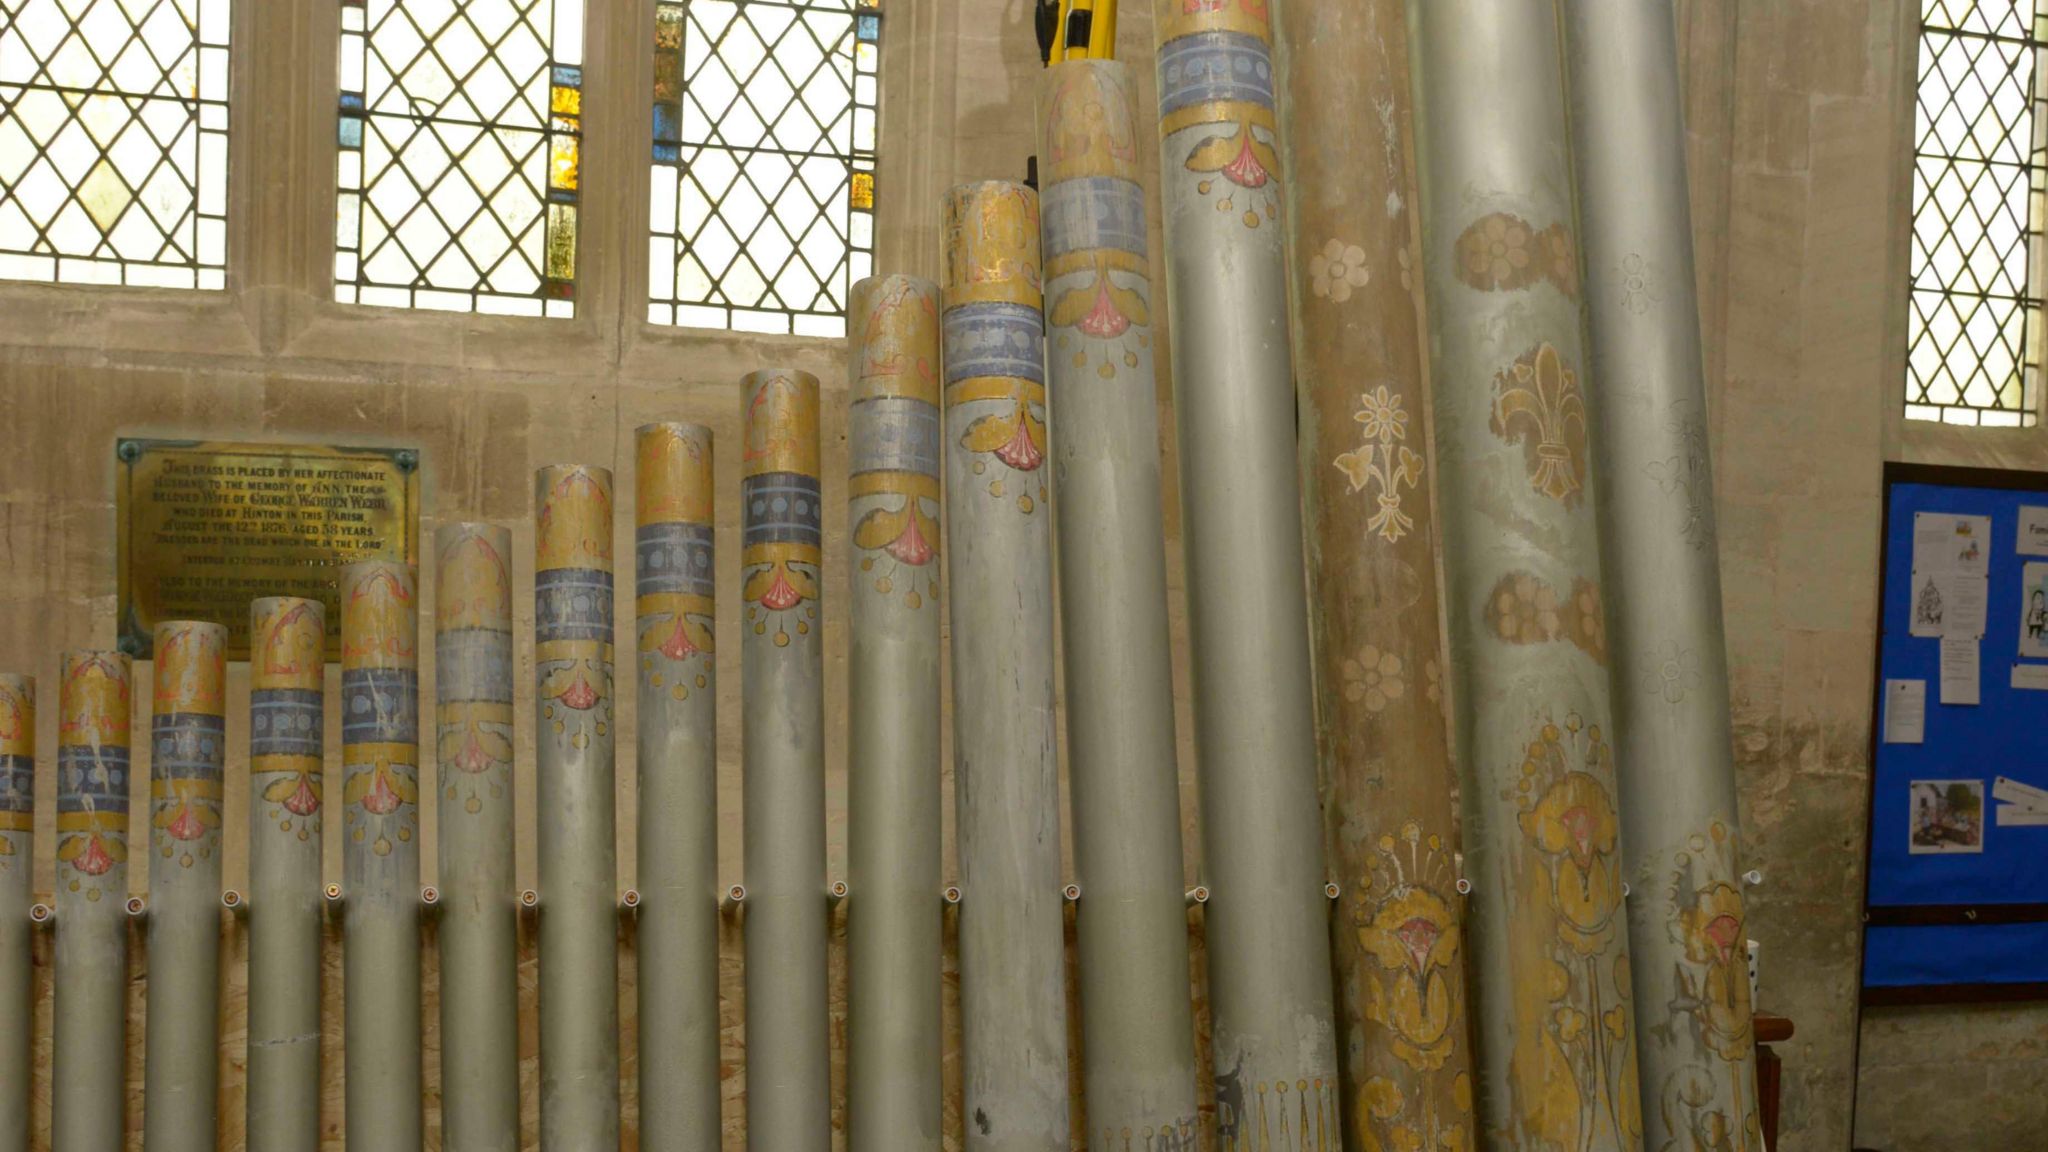 Row of organ pipes off the instrument in height order